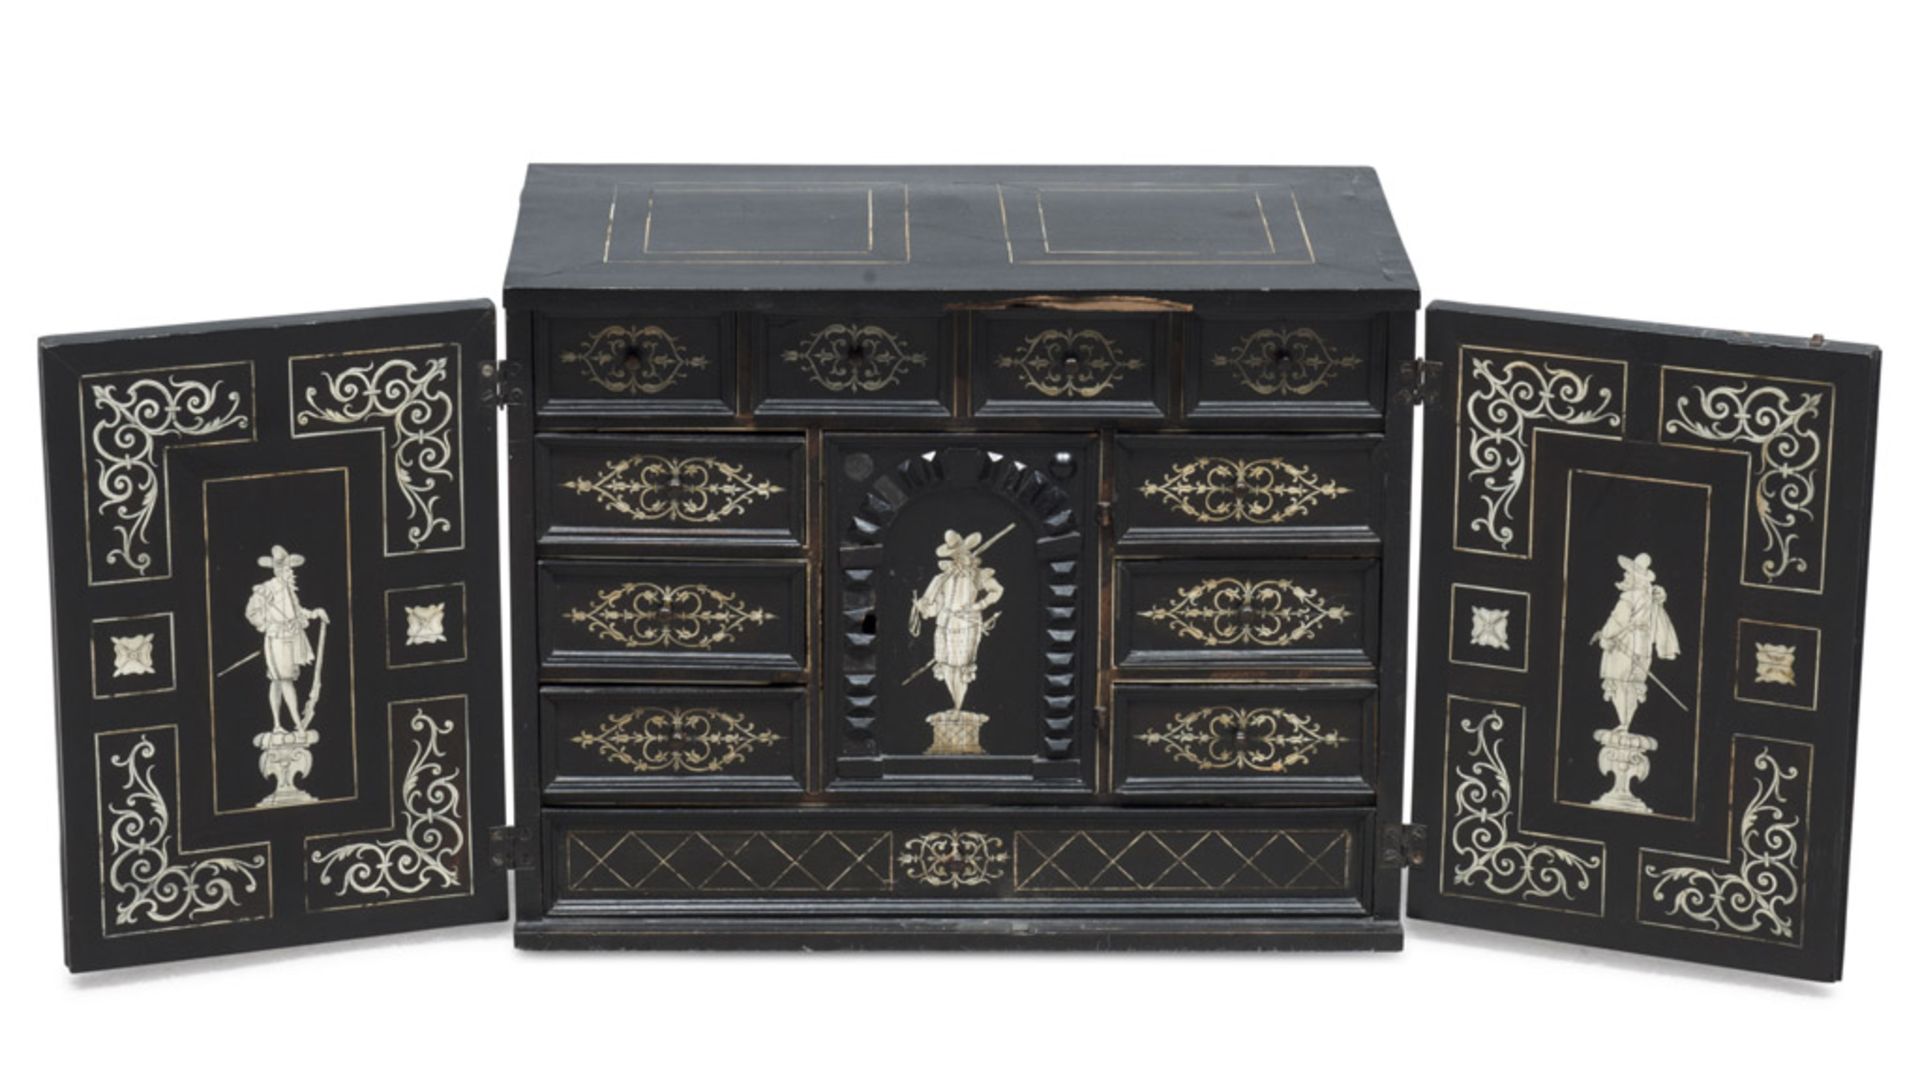 SMALL COIN CABINET IN EBONY, LOMBARDY SECOLO with ivory inlays of plant motifs and figures of